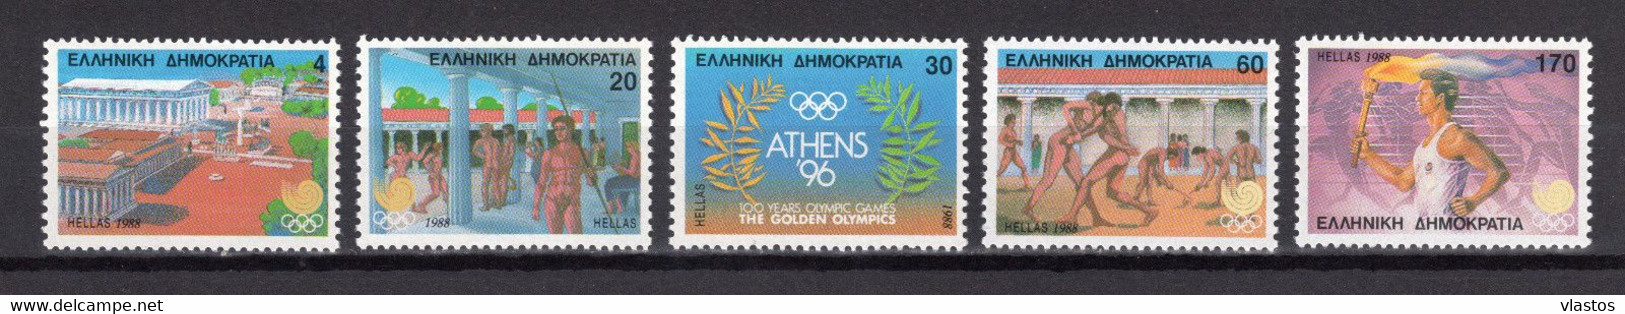 GREECE 1988 COMPLETE YEAR - PERFORATED STAMPS MNH - Años Completos